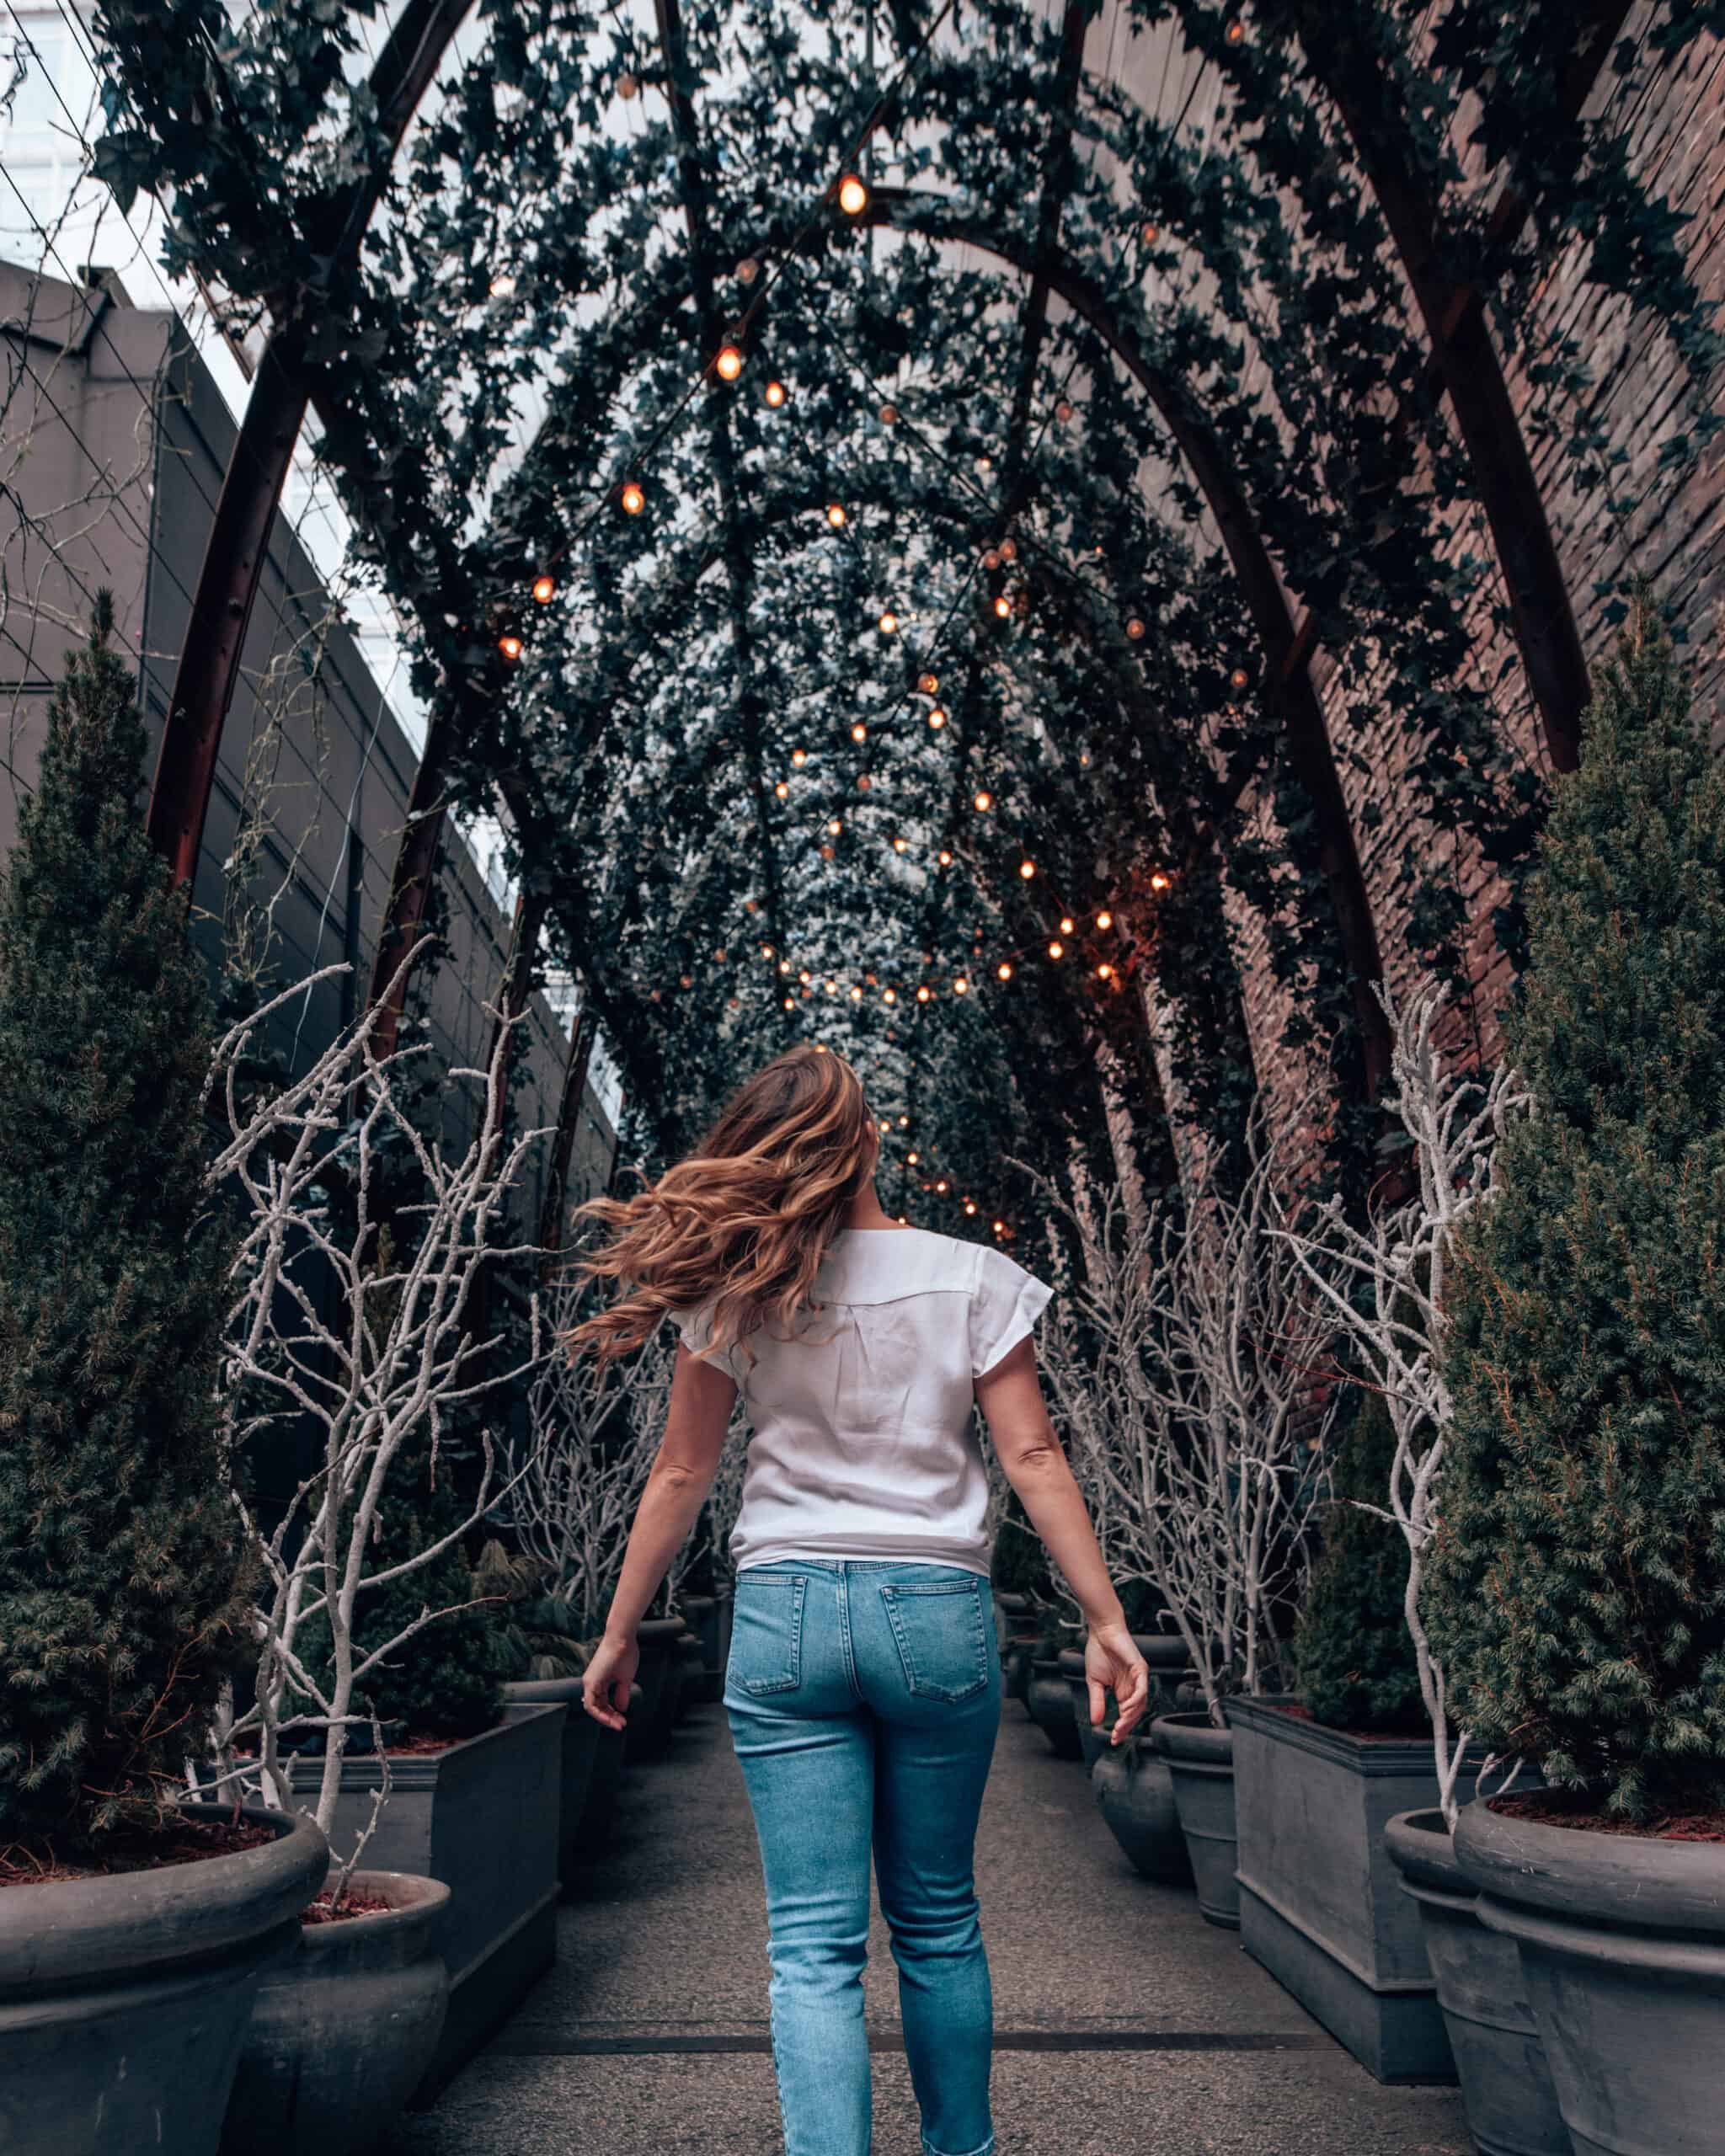 Instagrammable Places in NYC